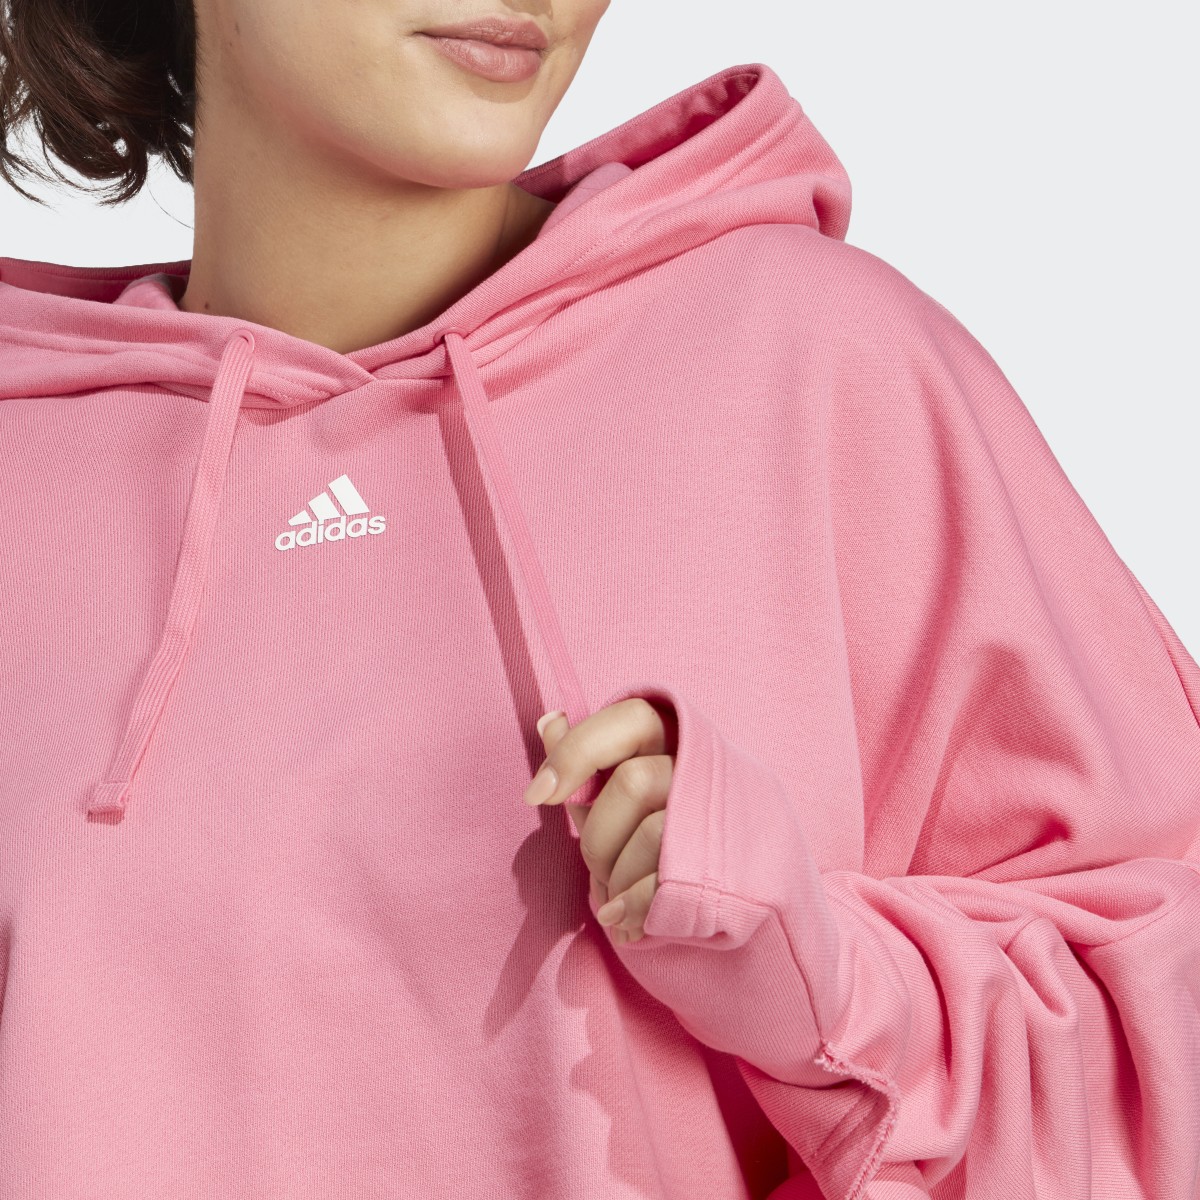 Adidas Collective Power Cropped Hoodie (Plus Size). 6